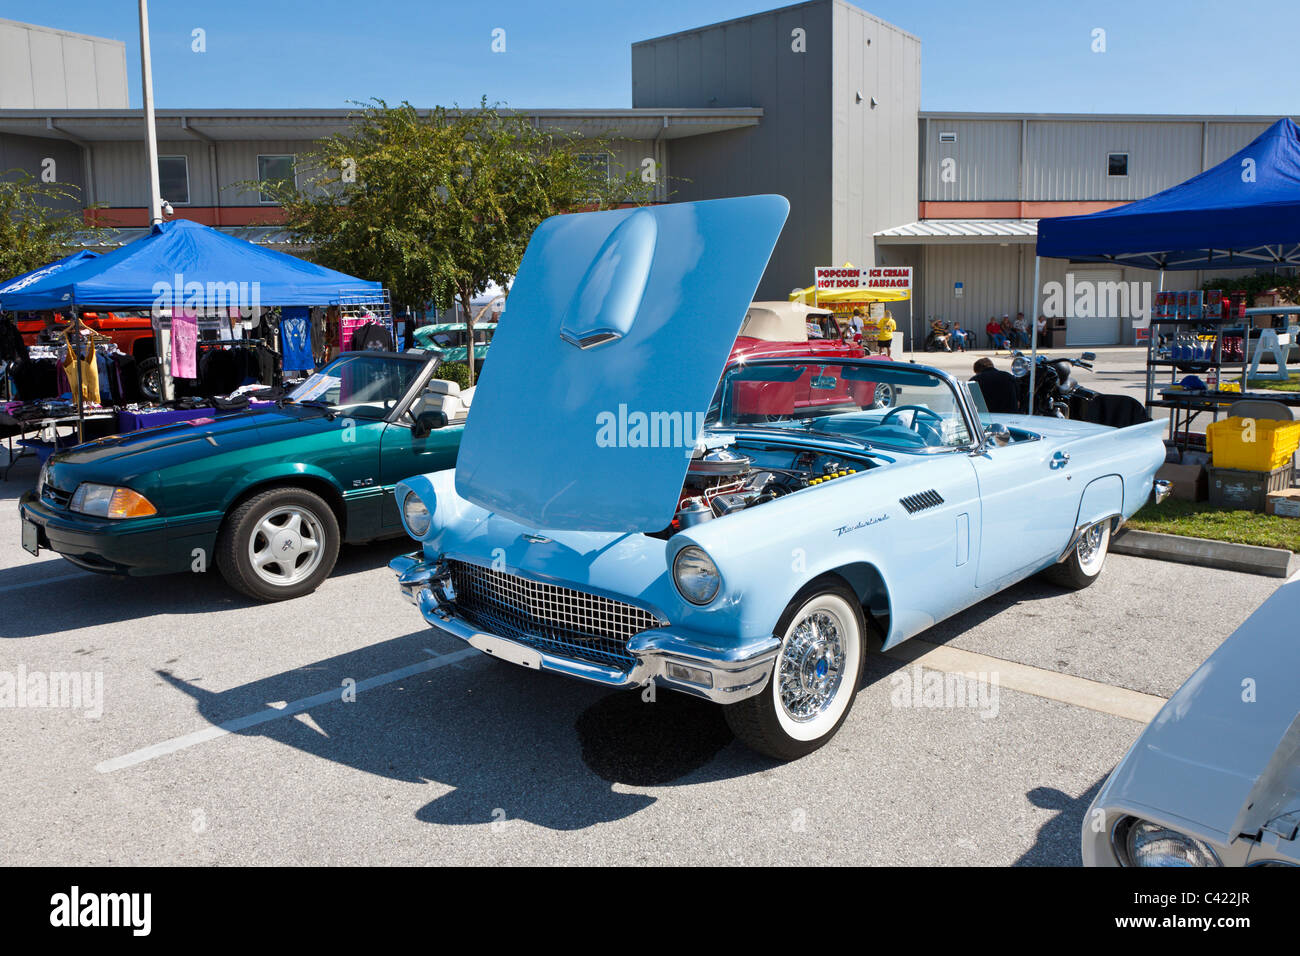 Antique 1957 Ford Thunderbird classic car at show in Leesburg, Florida, USA Stock Photo